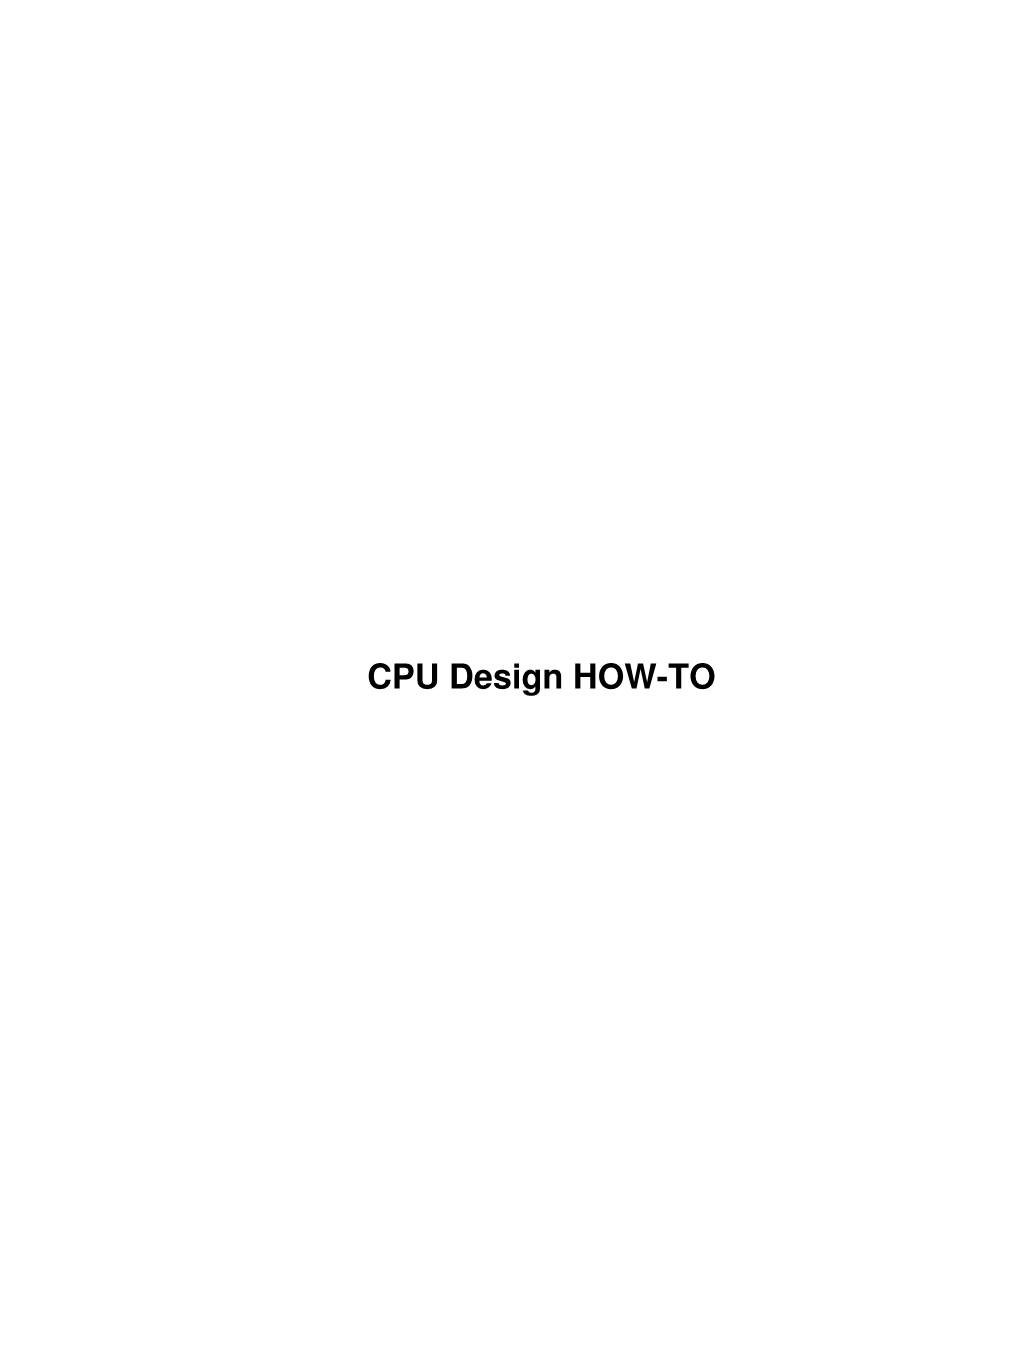 CPU Design HOW-TO CPU Design HOW-TO Table of Contents CPU Design HOW-TO